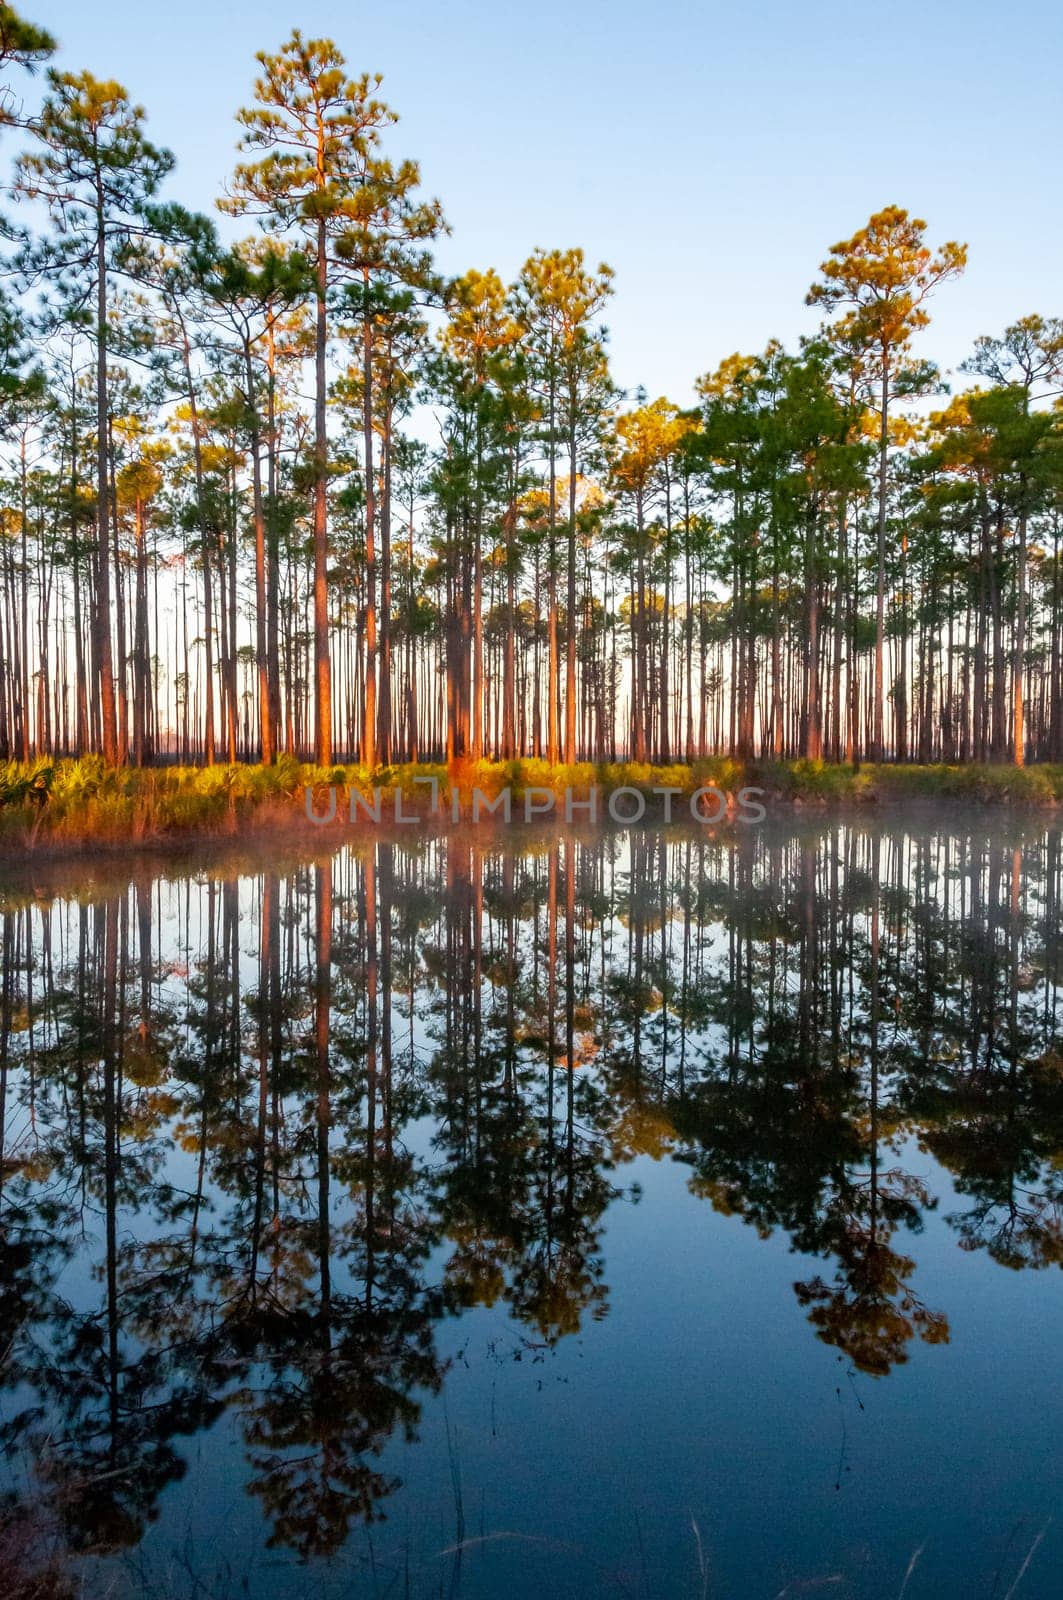 Reflection of trees in the lake water in the evening at sunset, Louisiana, USA by Hydrobiolog